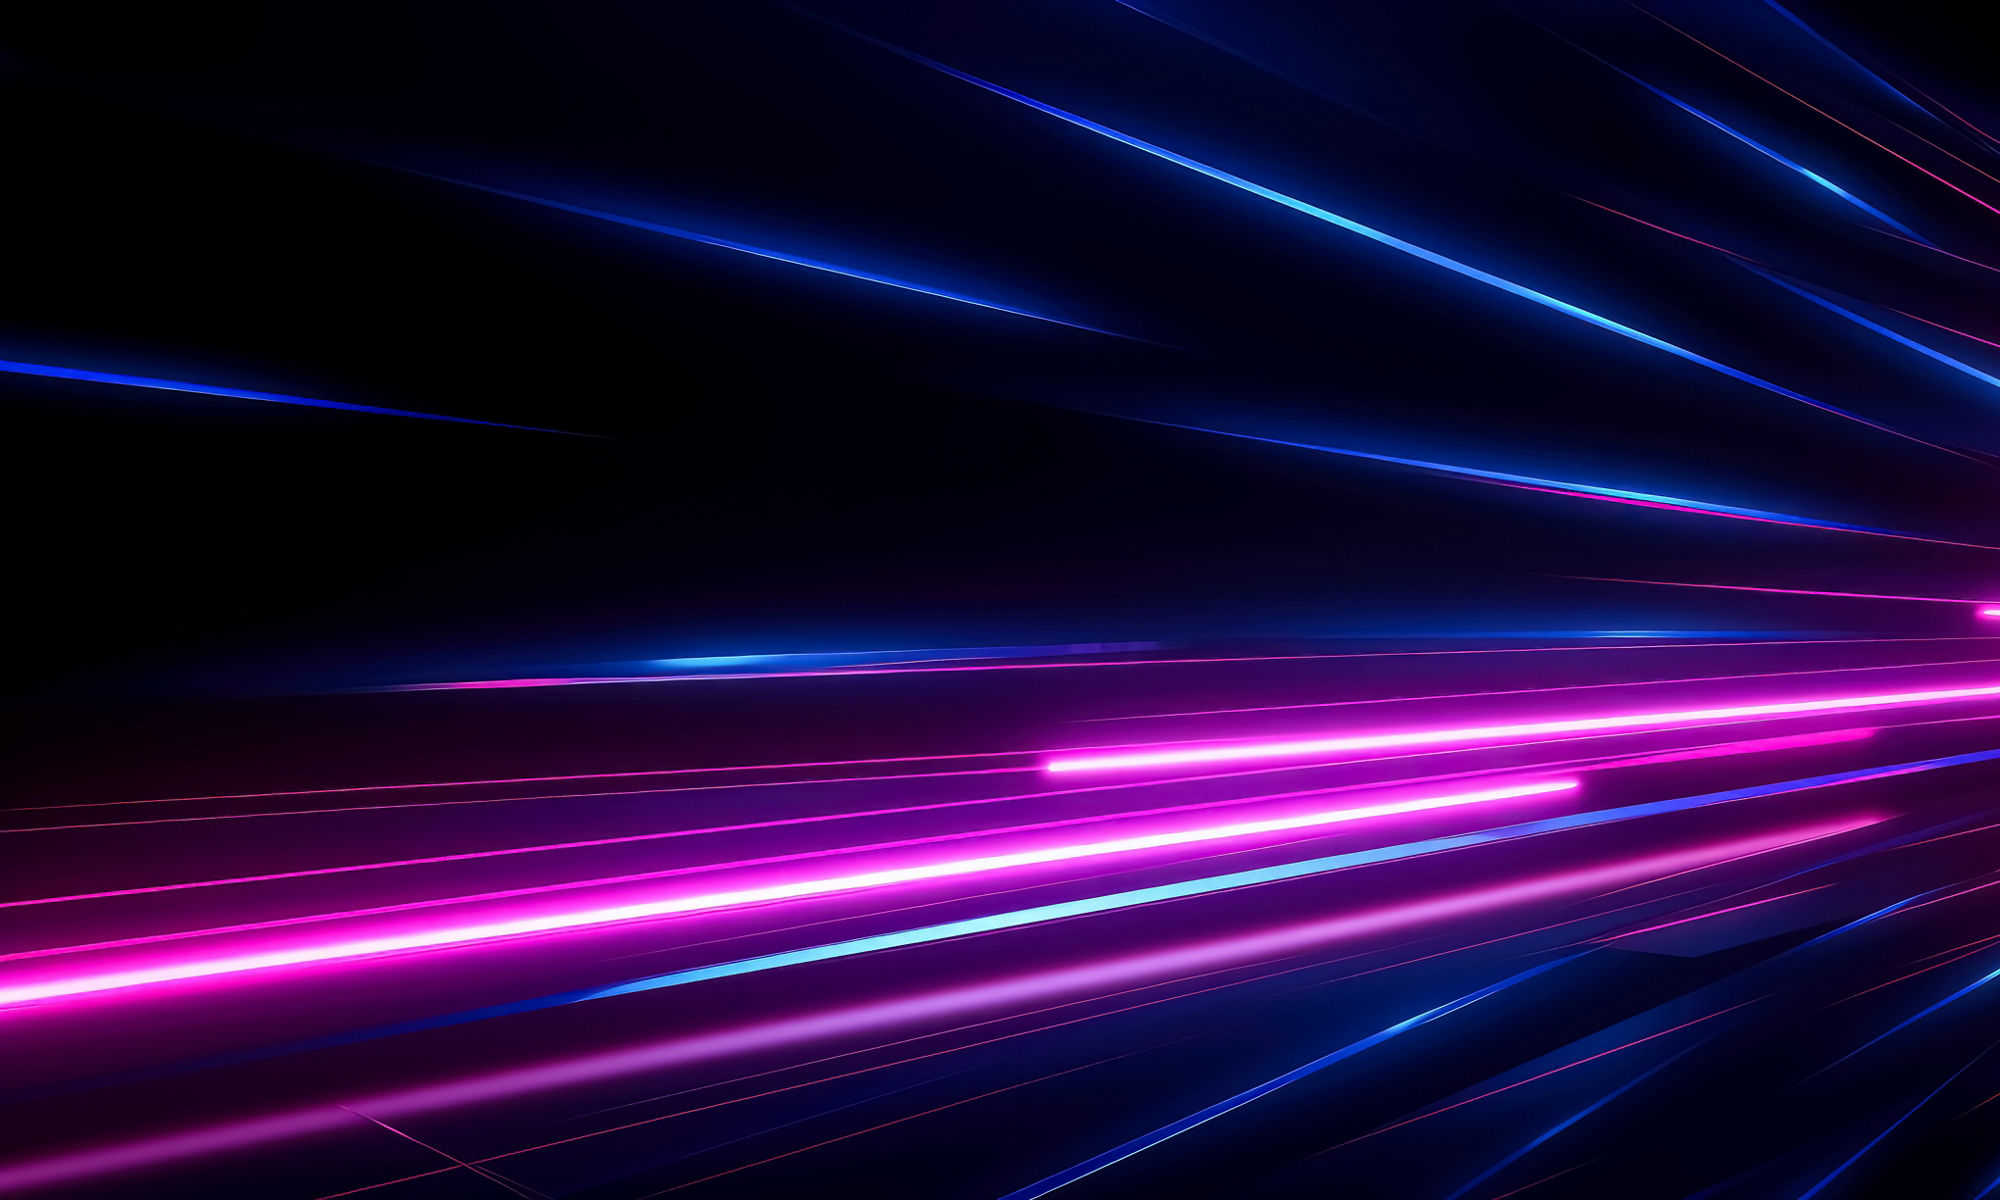 Abstract pink and blue neon lines against black background receding into the background